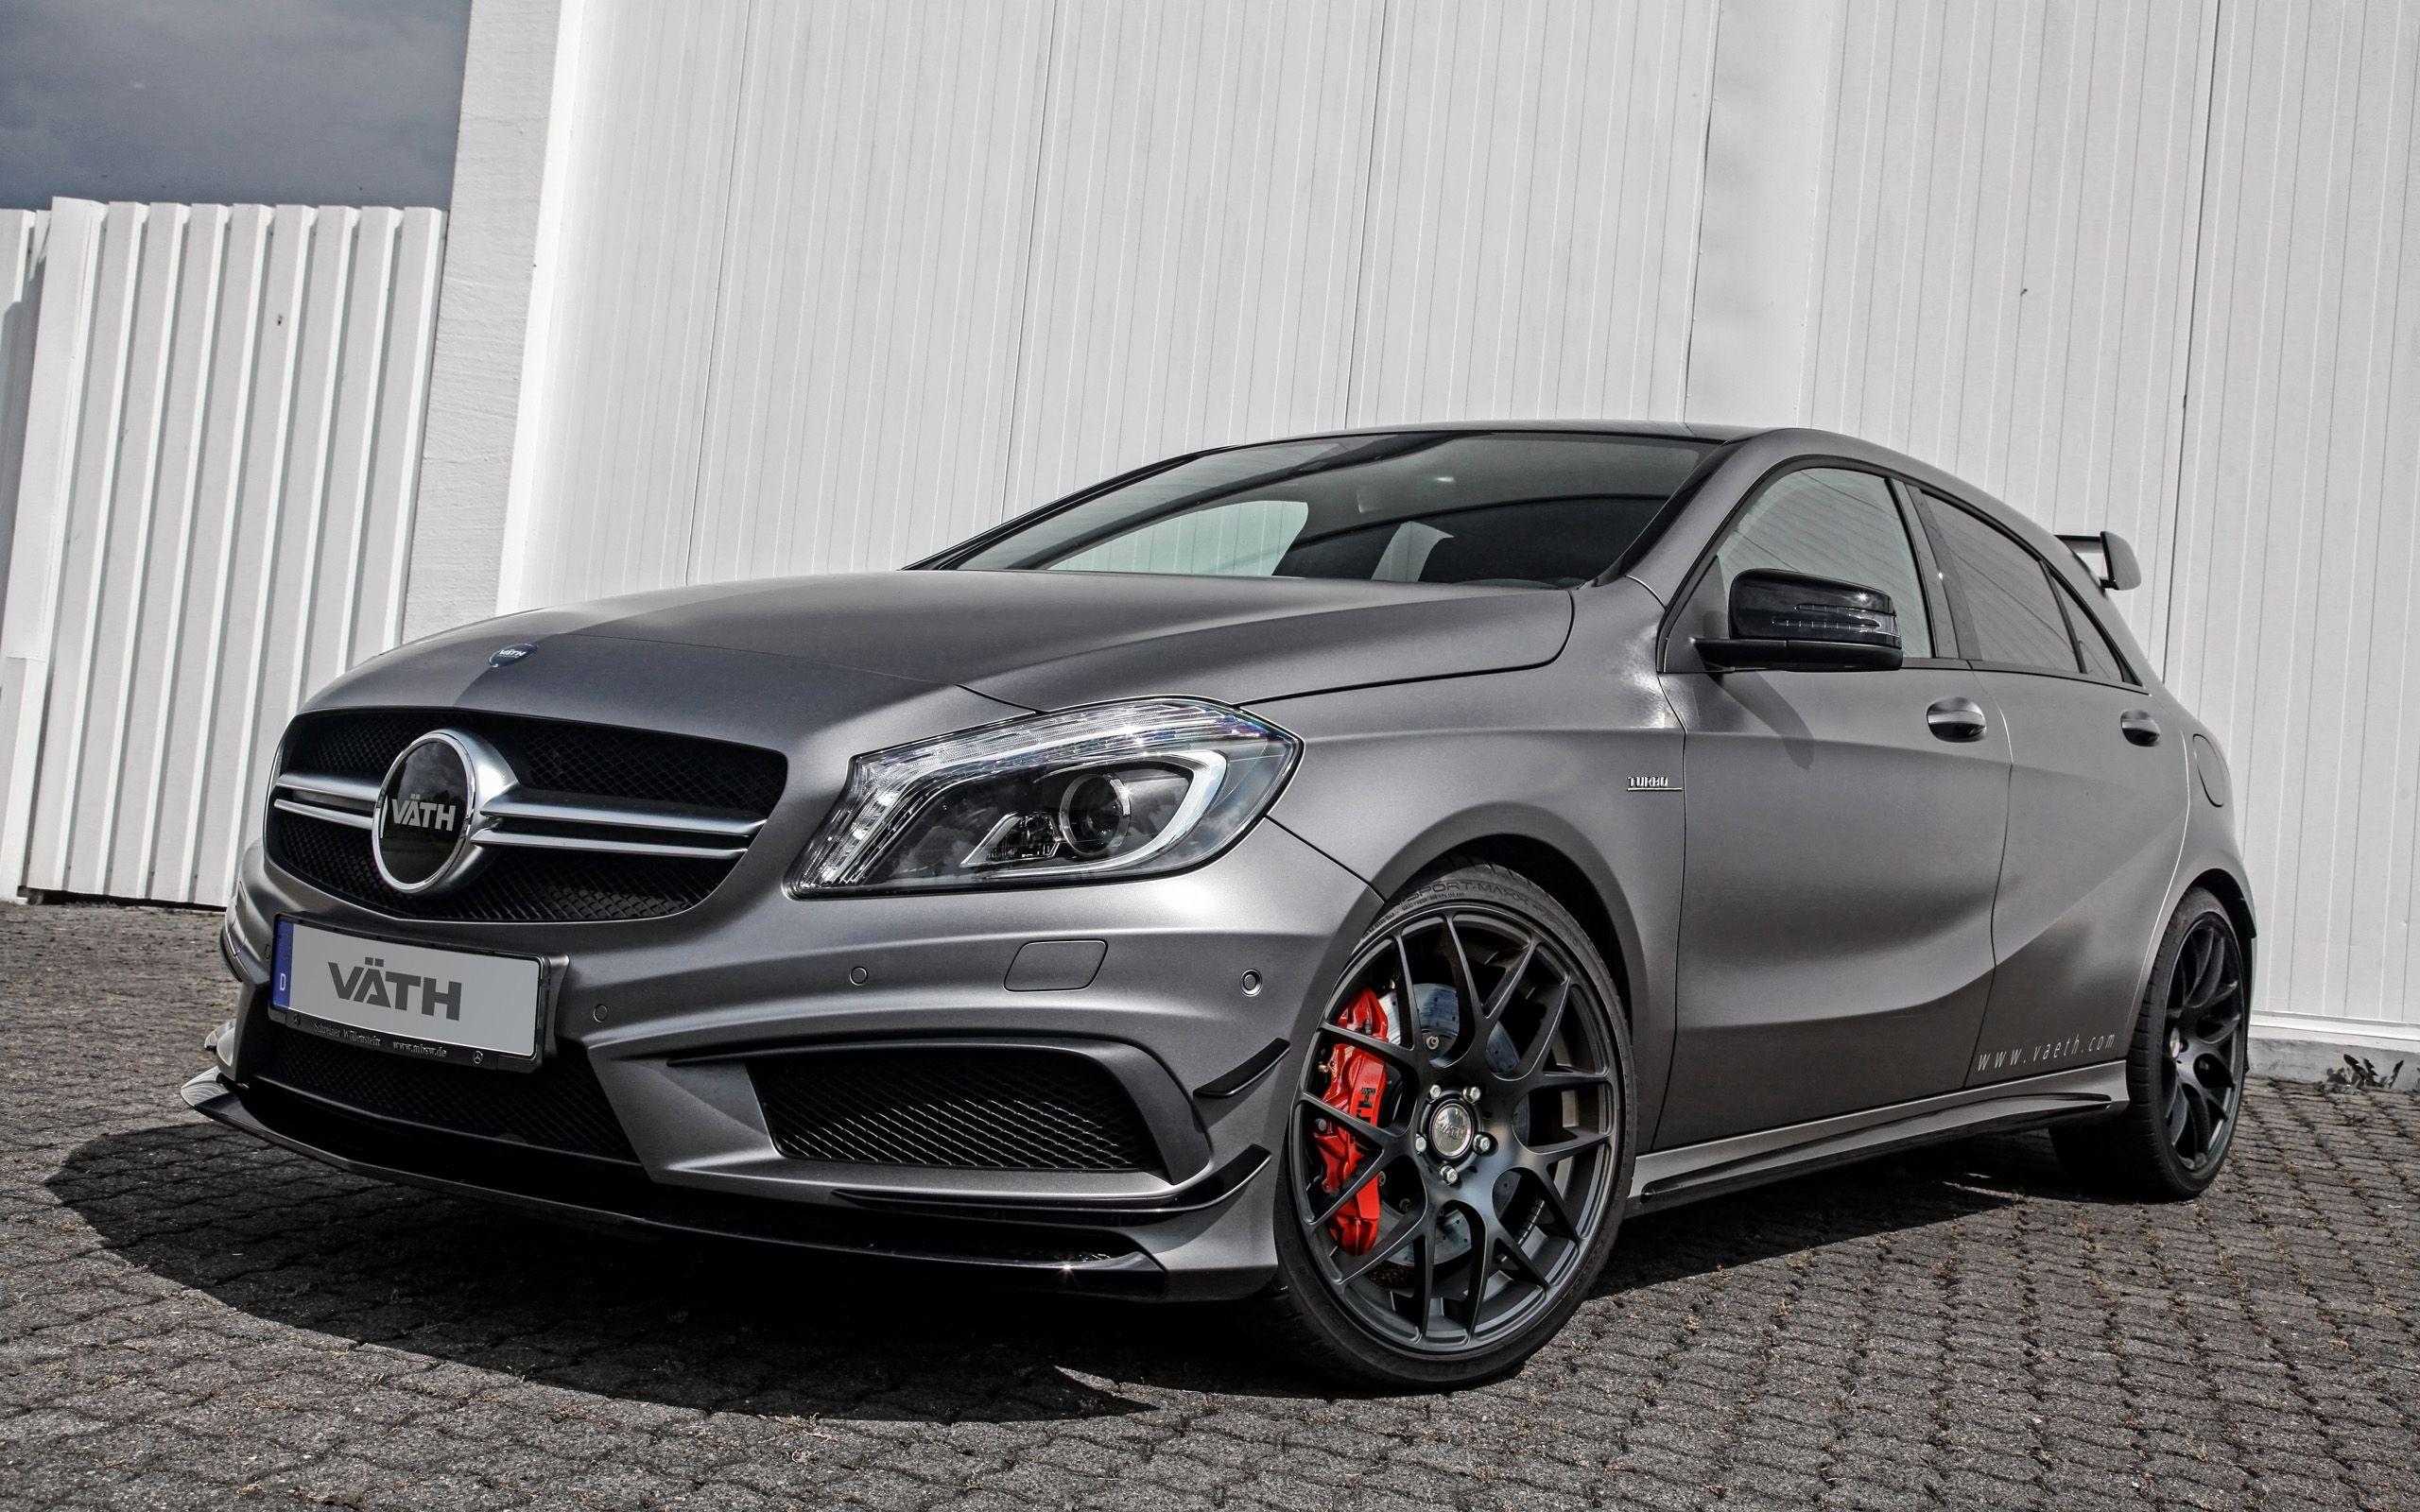 Mercedes Benz Amg A45 Wallpapers Top Free Mercedes Benz Amg A45 Images, Photos, Reviews